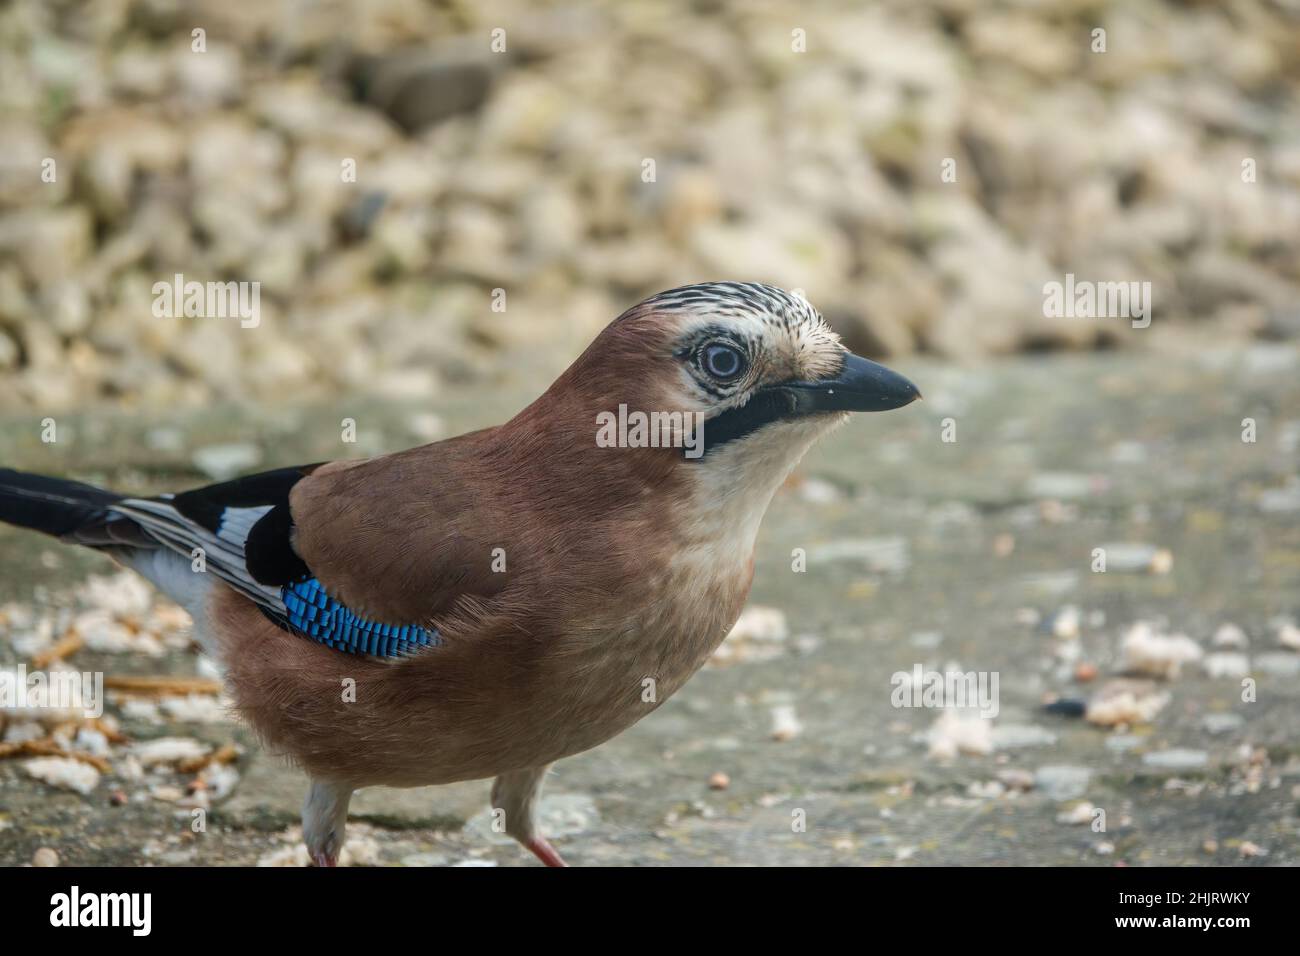 close up of a jay (Garrulus glandarius) eating bird seed and bread from amongst patio stones Stock Photo